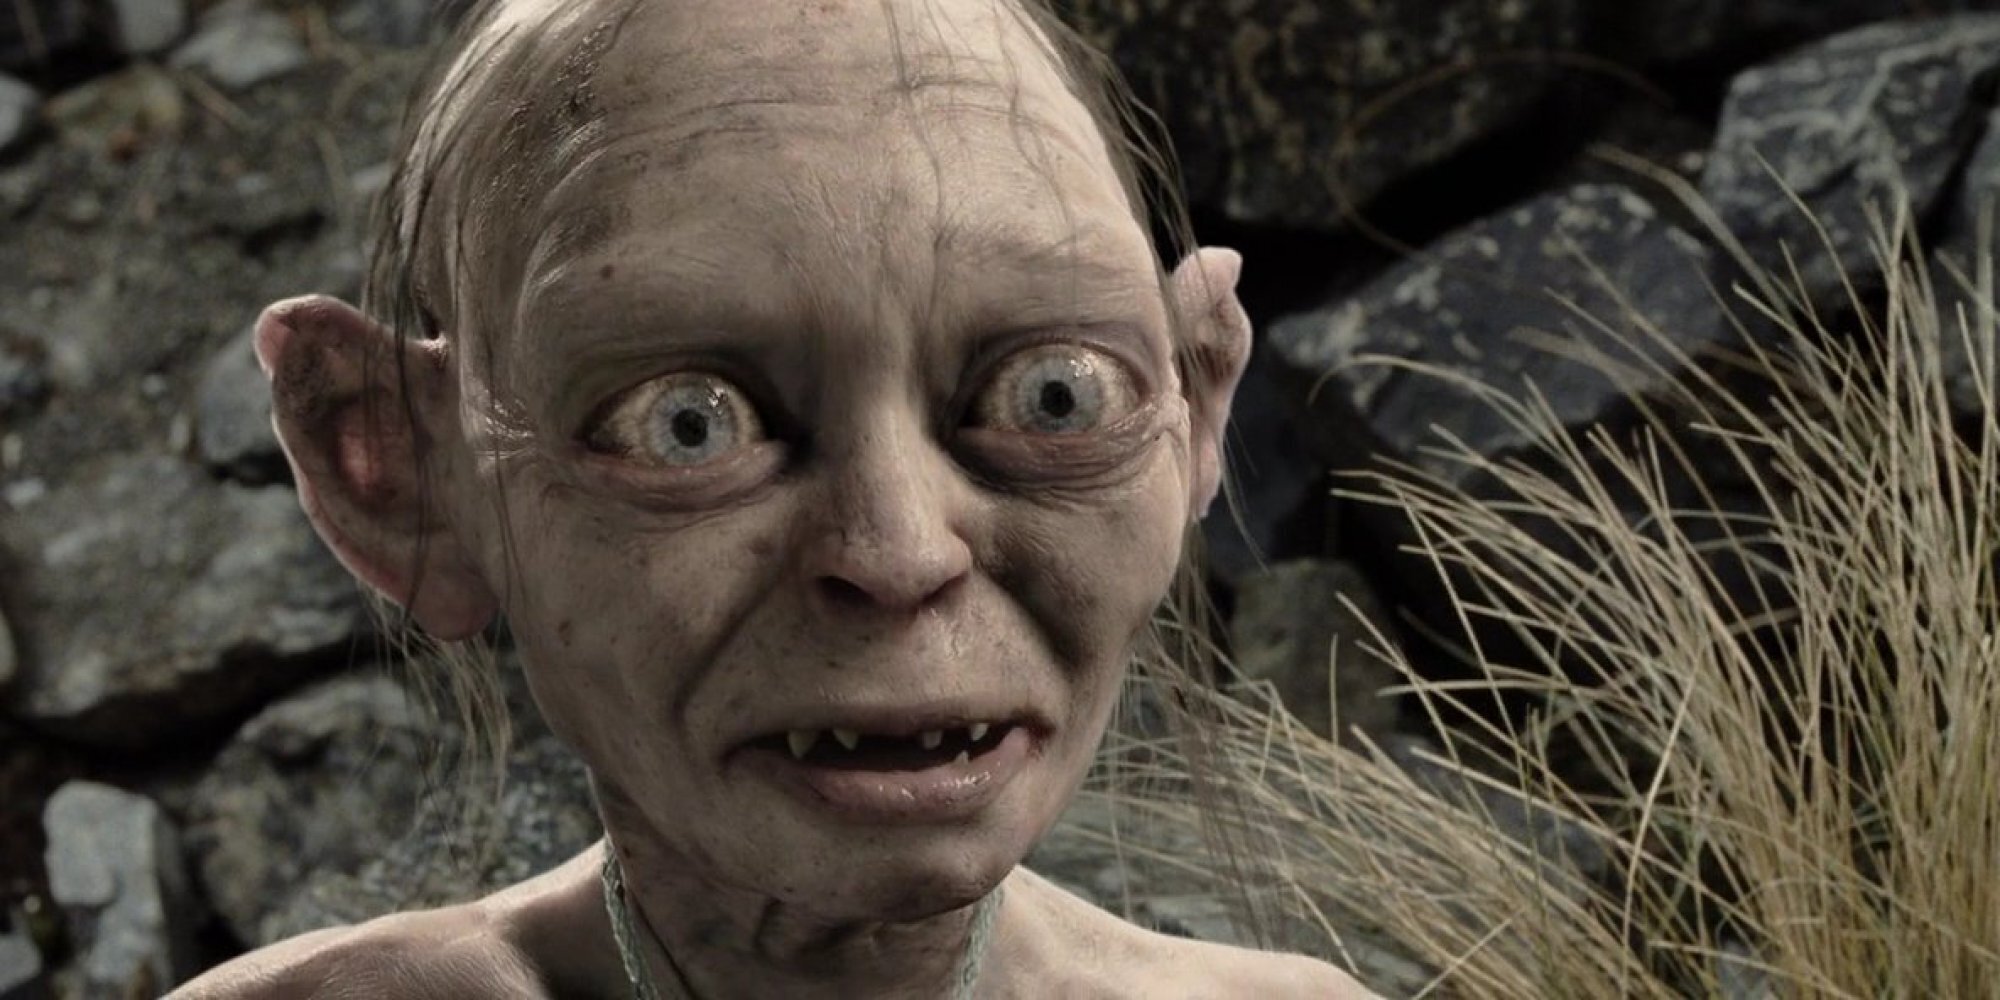 who did the voice of gollum in lord of the rings